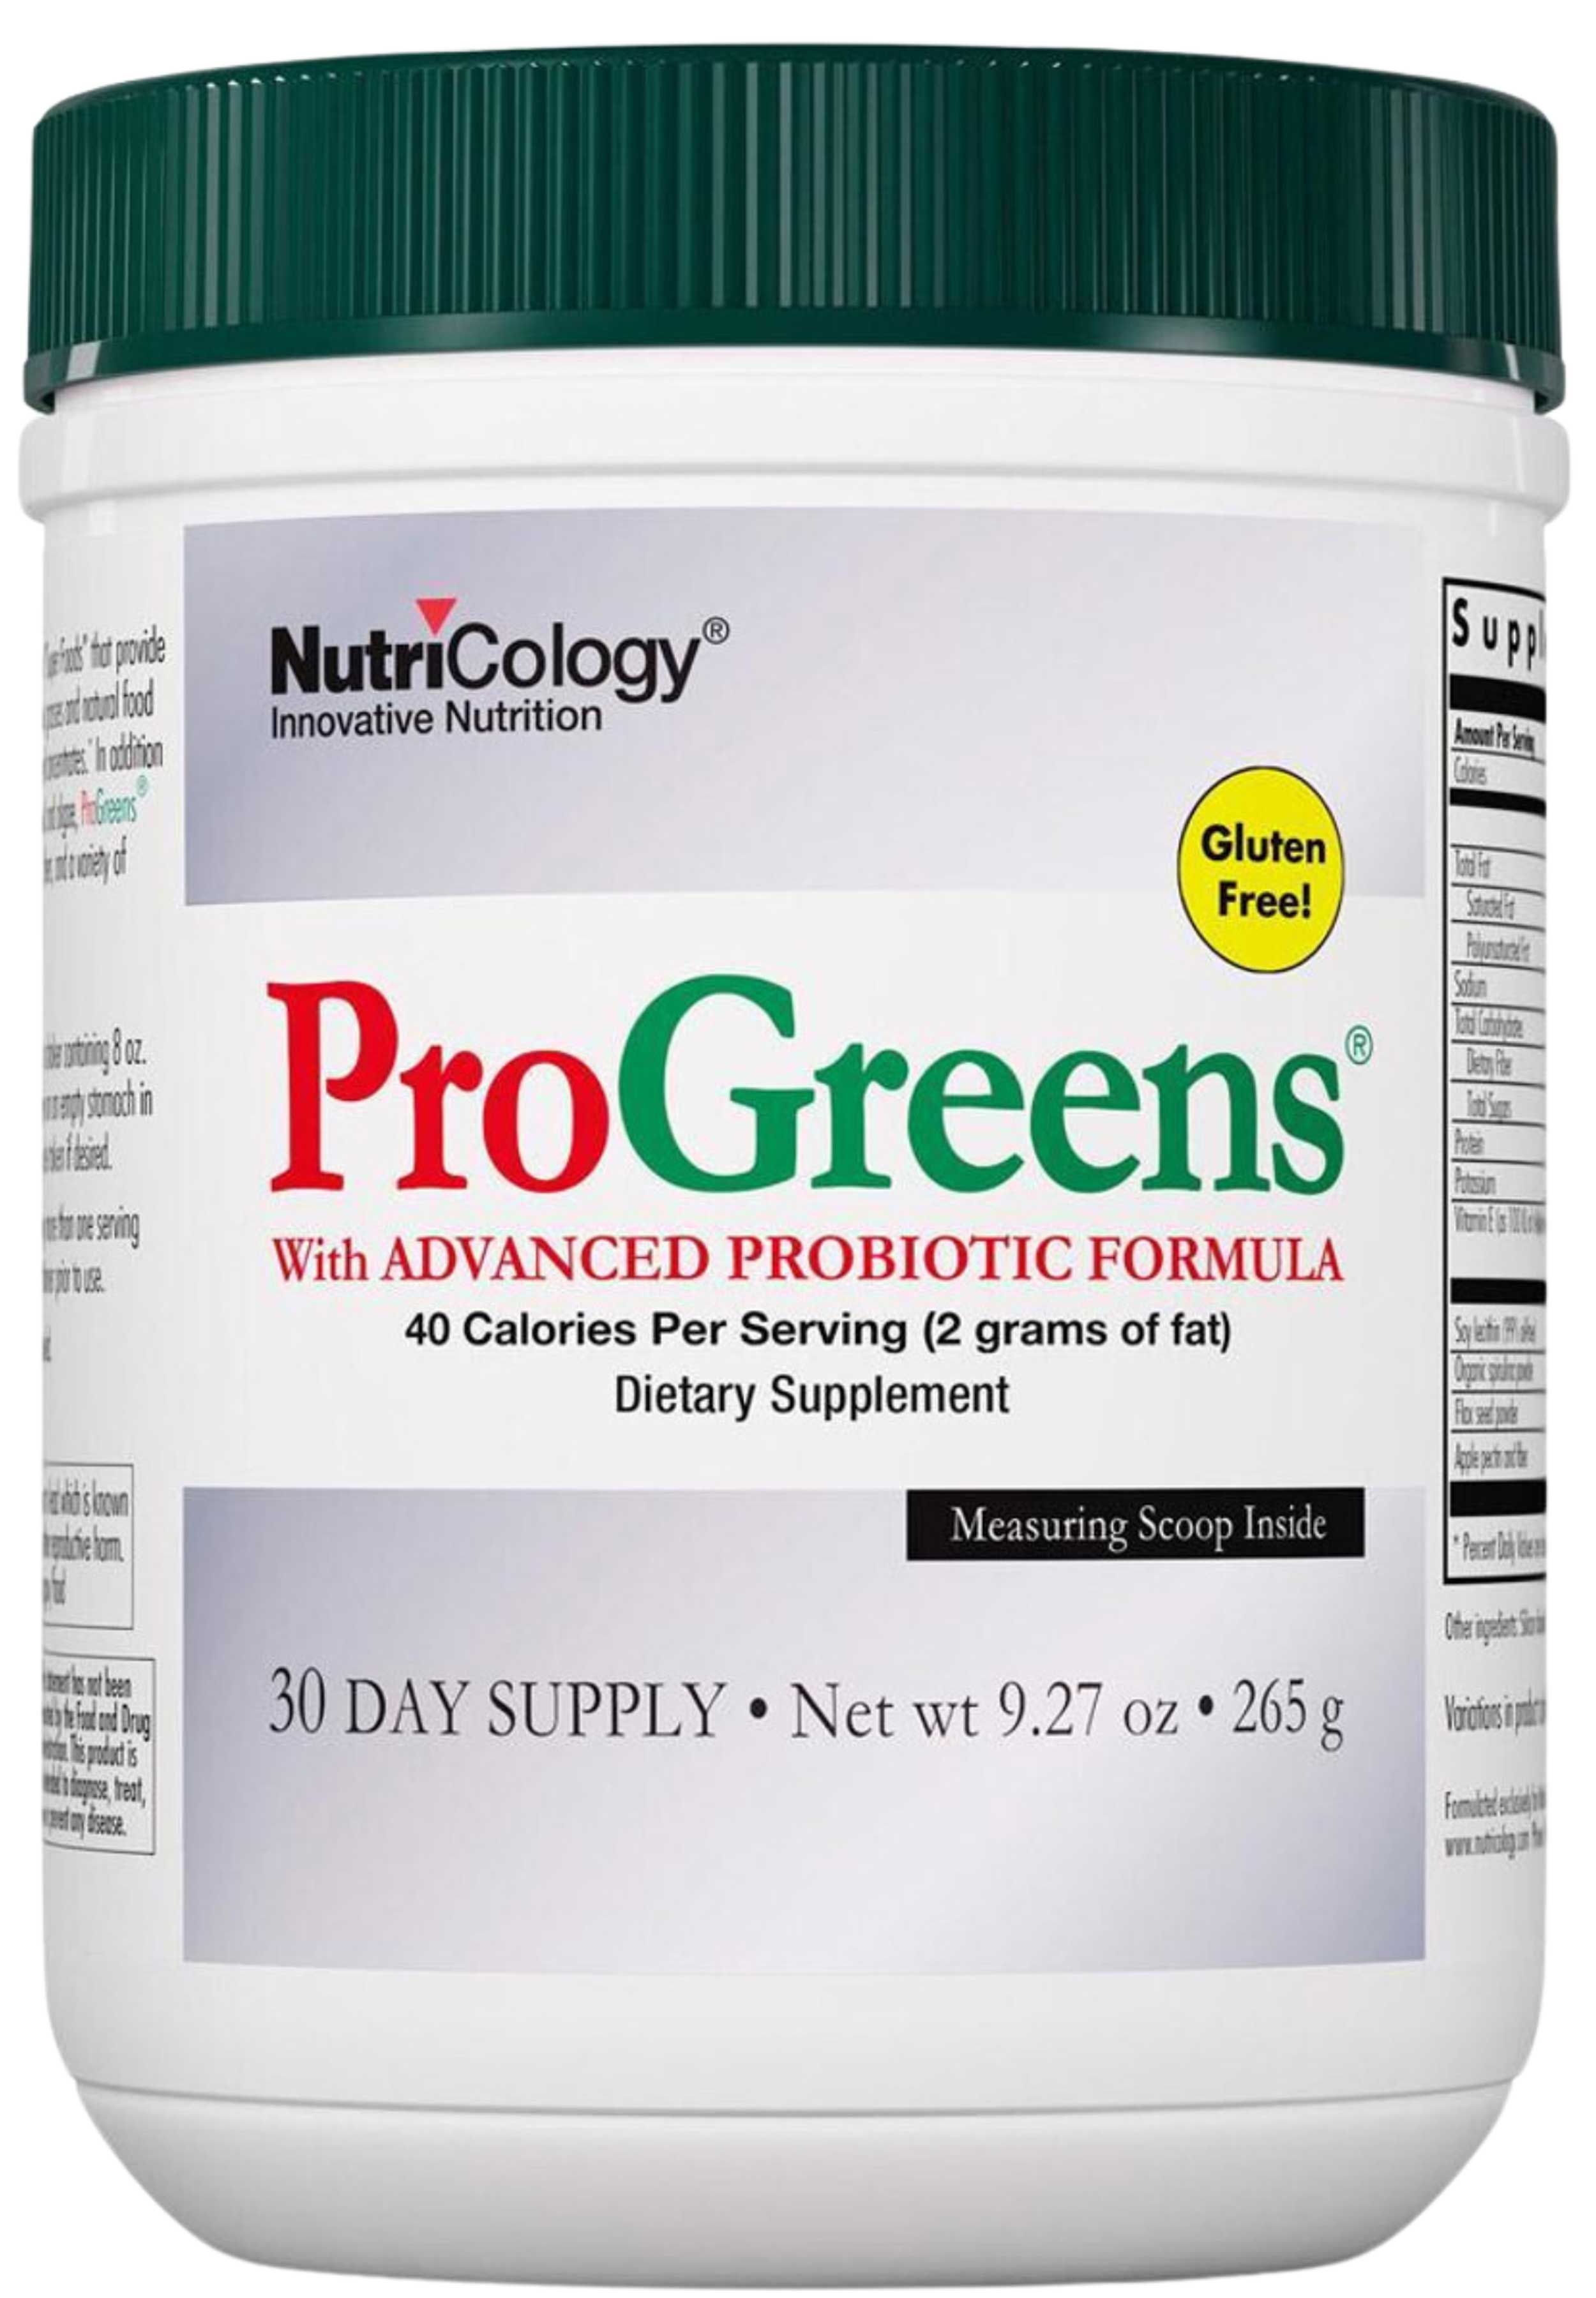 Nutricology ProGreens with Advanced Probiotic Formula